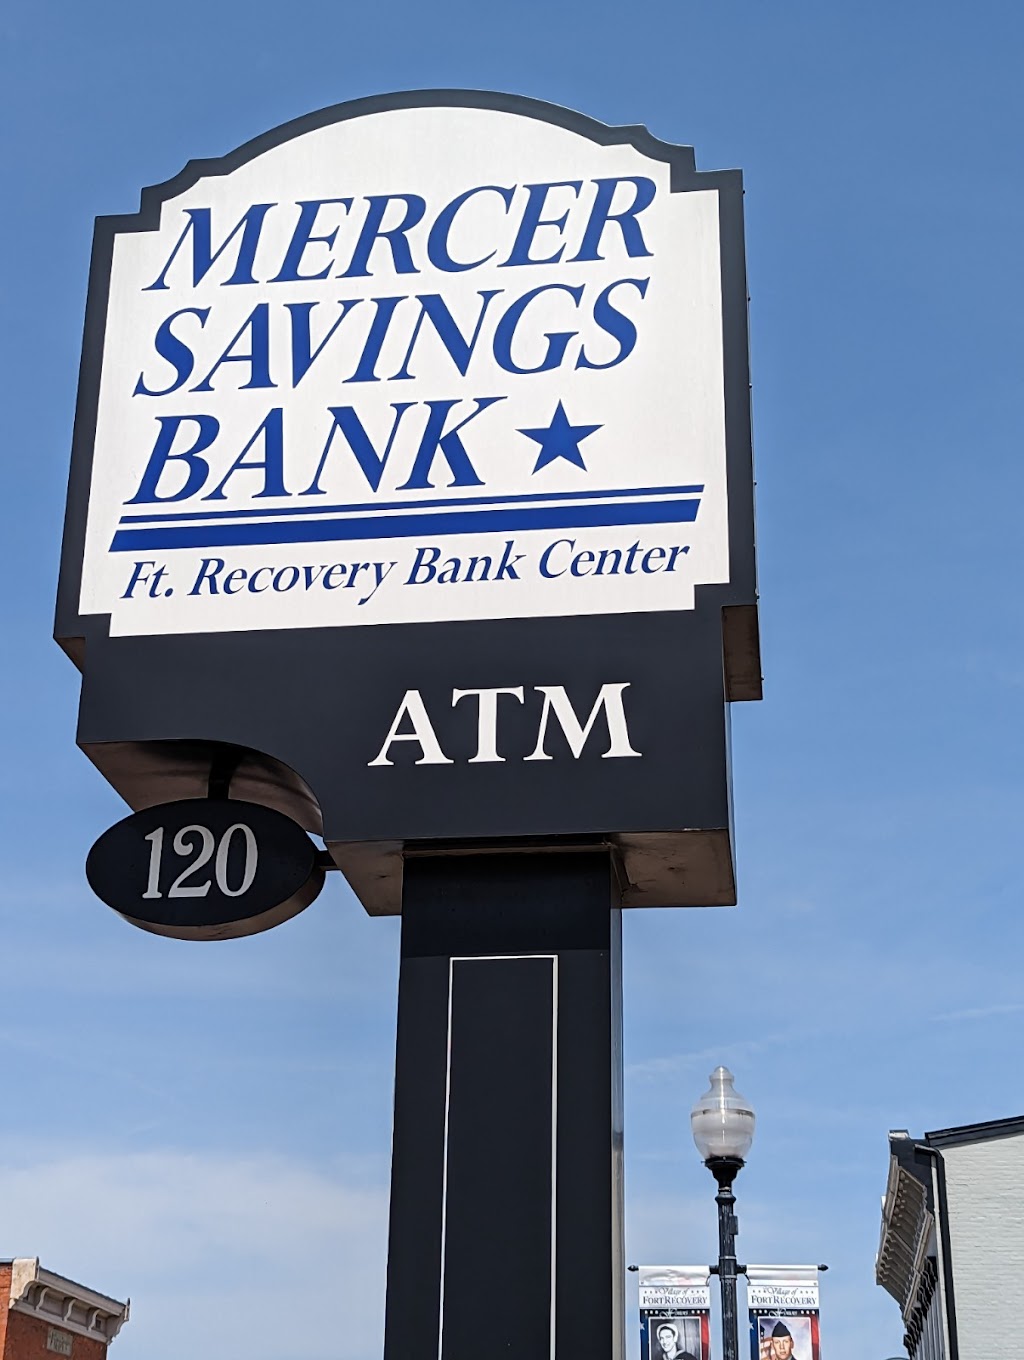 2f7928d2b830cabebbc3fed517052c0f  United States Ohio Mercer County Gibson Township Fort Recovery Mercer Savings Bank 